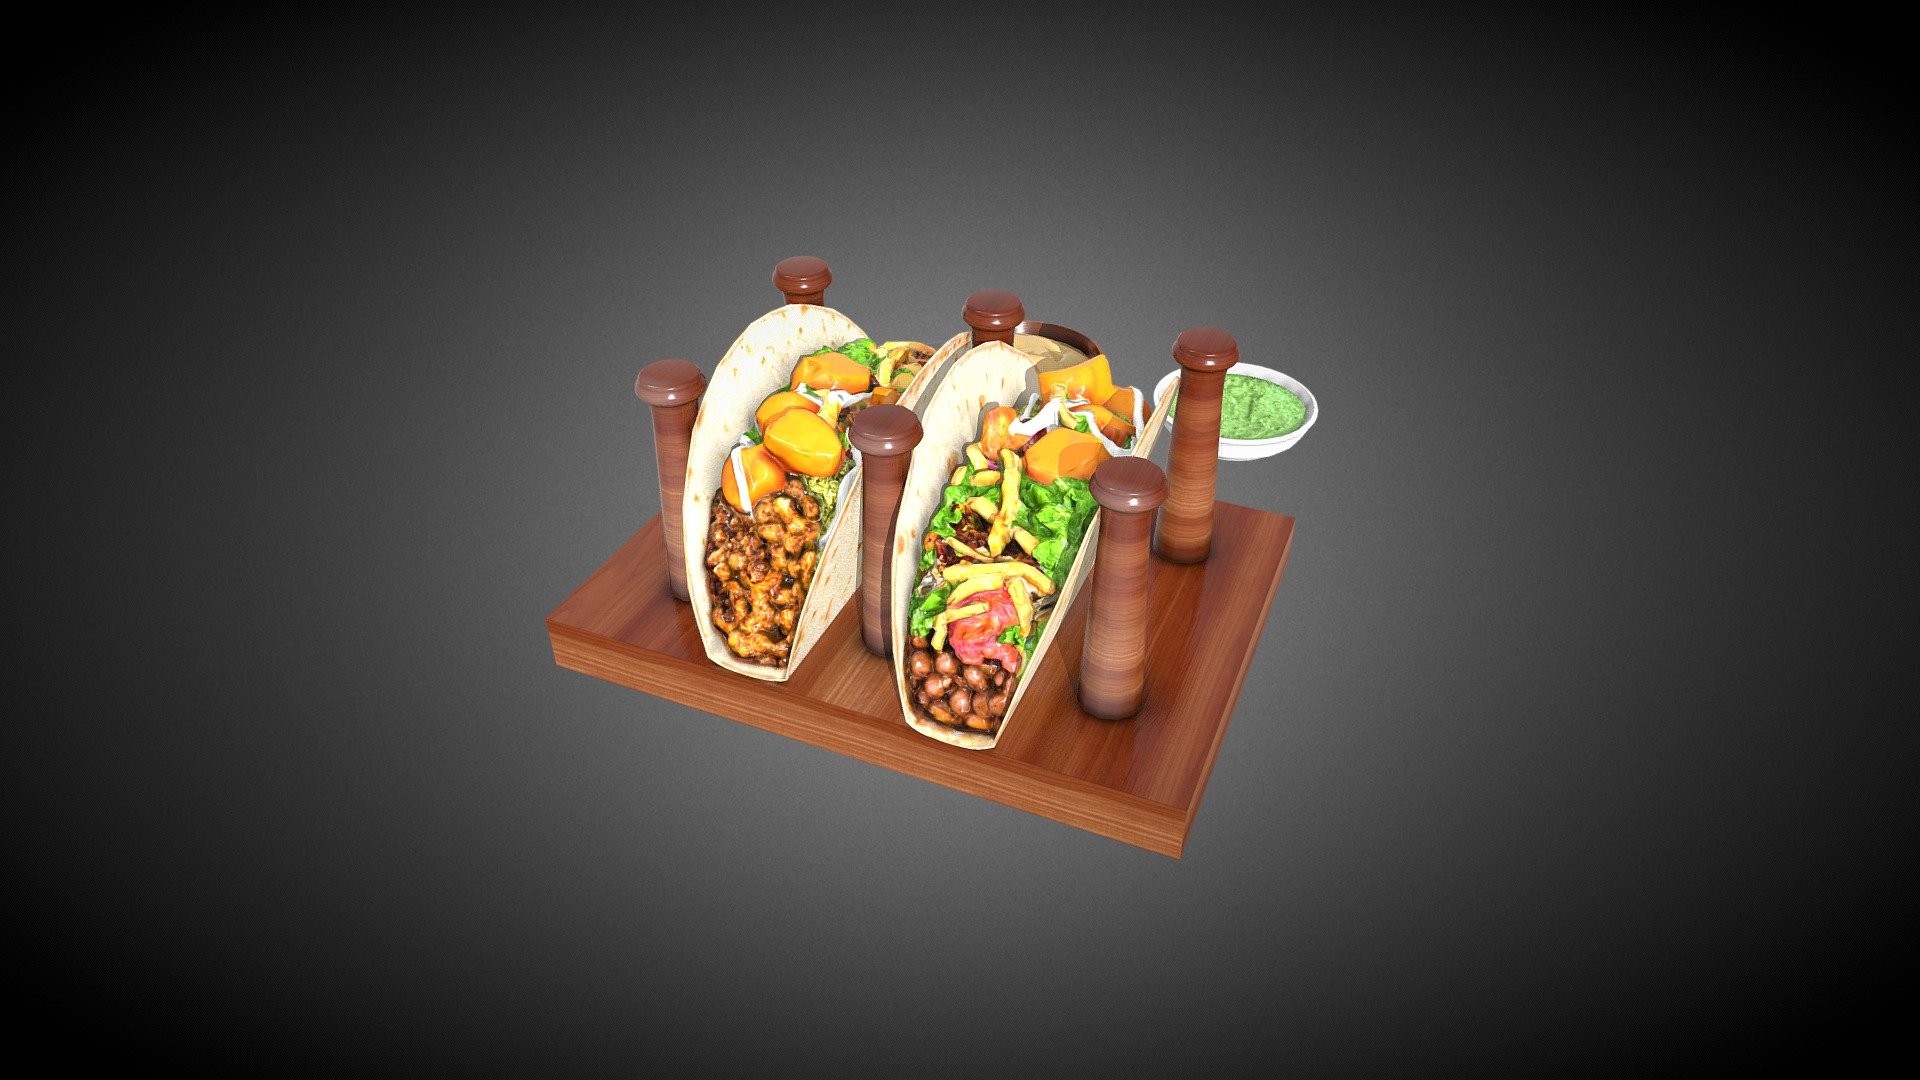 Taco - Mexican Food contains low poly 3D models of fastfoods with High Quality textures to fill up your game environment. The assets are VR-Ready and game ready.

Total Polygons - 16222

Total Tris - 18560

For Unity3d (Built-in, URP, HDRP) Ready Assets visit our Unity Asset Store Page

Enjoy and please rate the asset!

Contact us on for AR/VR related queries and development support

Gmail - designer@devdensolutions.com

Website

Twitter

Instagram

Facebook

Linkedin

Youtube - Taco - Mexican Food - Buy Royalty Free 3D model by Devden 3d model